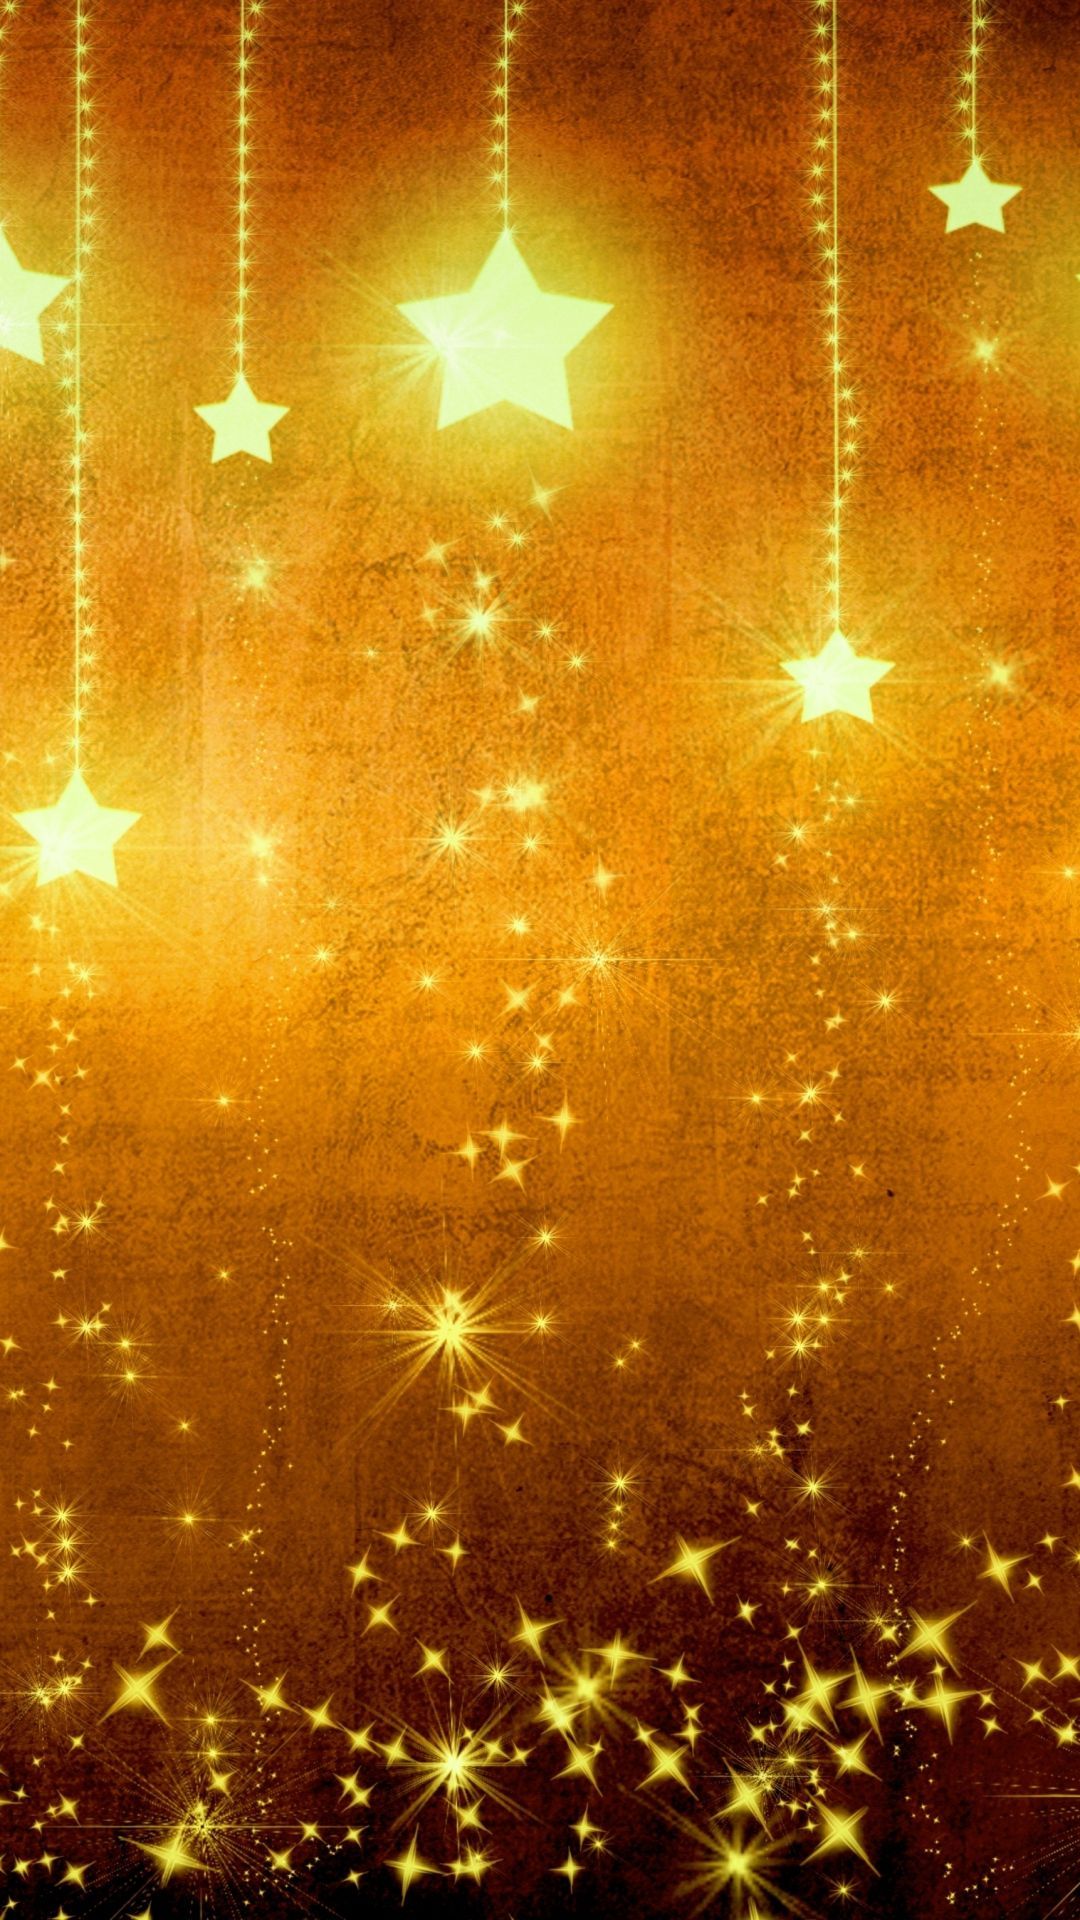 Star Gold Holiday Background Brown Yellow Light Texture iPhone 6 Wallpap. Wallpaper iphone christmas, Christmas wallpaper background, Christmas lights background